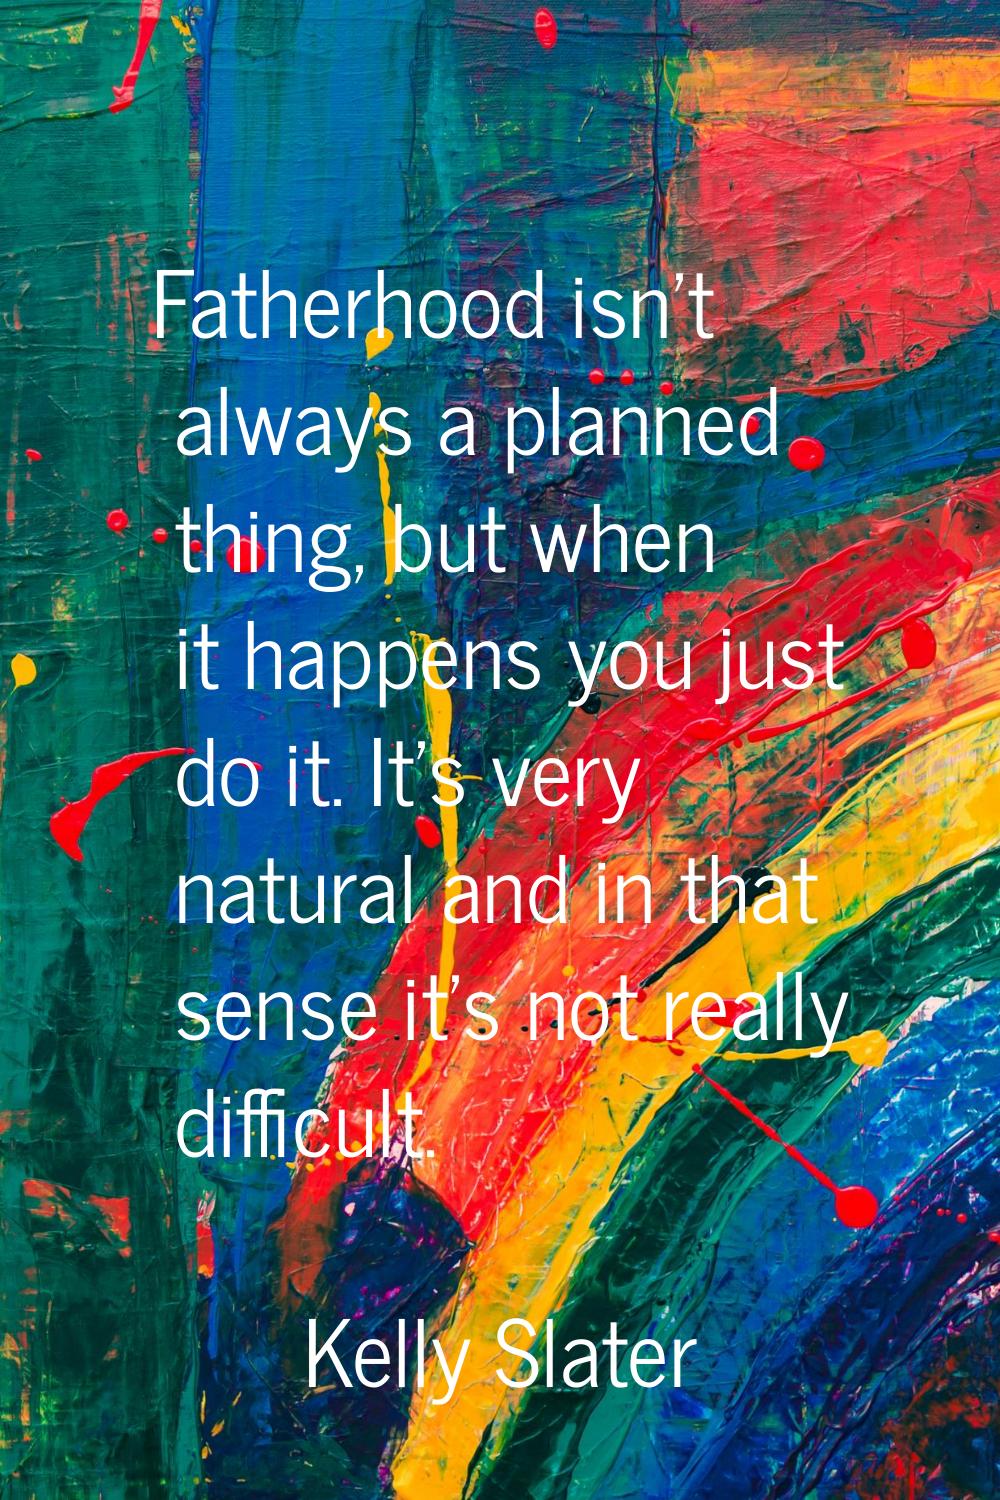 Fatherhood isn't always a planned thing, but when it happens you just do it. It's very natural and 